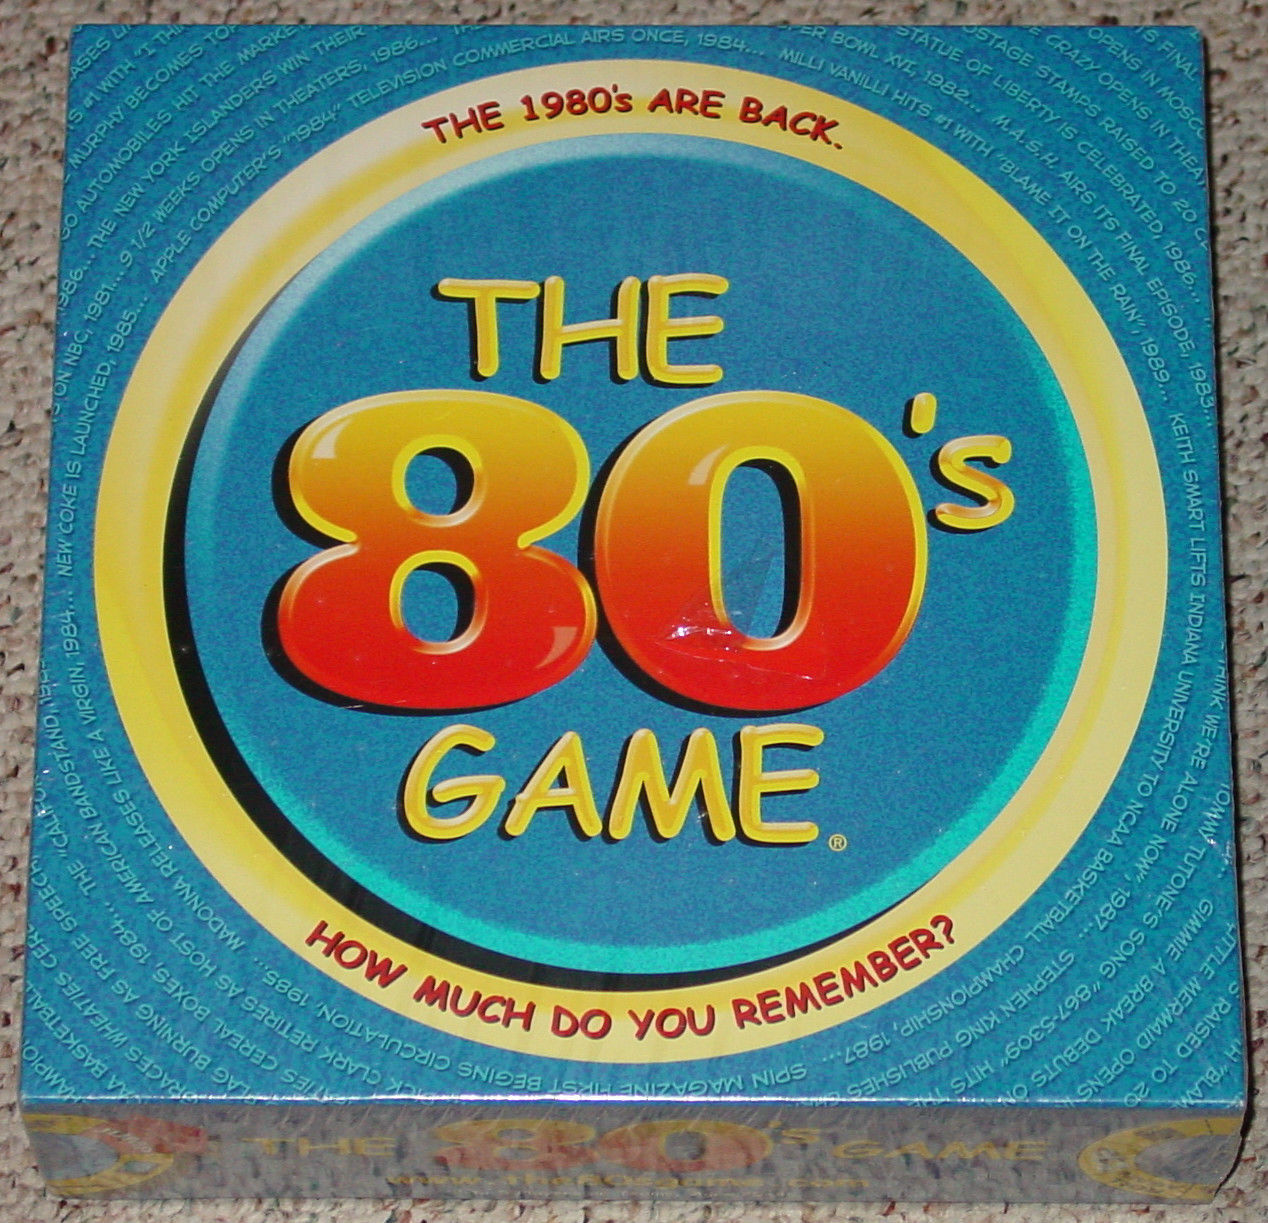 80'S BOARD GAME HOW MUCH DO YOU REMEMBER? 2001 NEW FACTORY SEALED BOX - $25.00